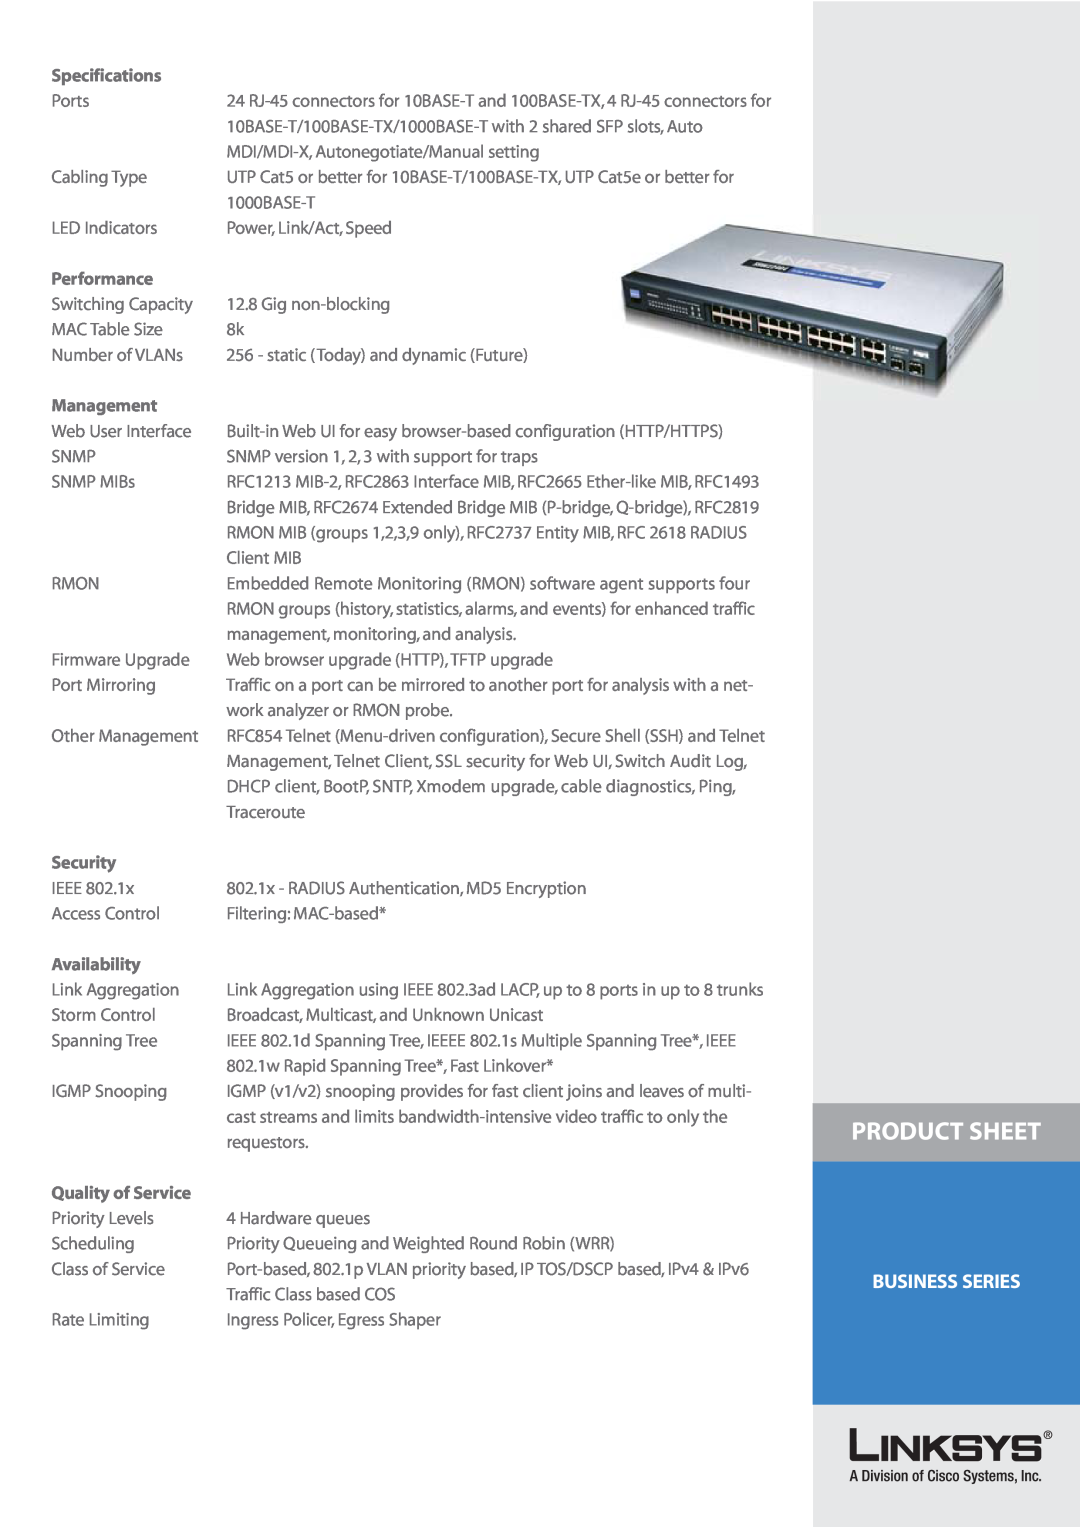 Cisco Systems SRW224G4 Product Sheet, Specifications, Performance, Management, Security, Availability, Quality of Service 